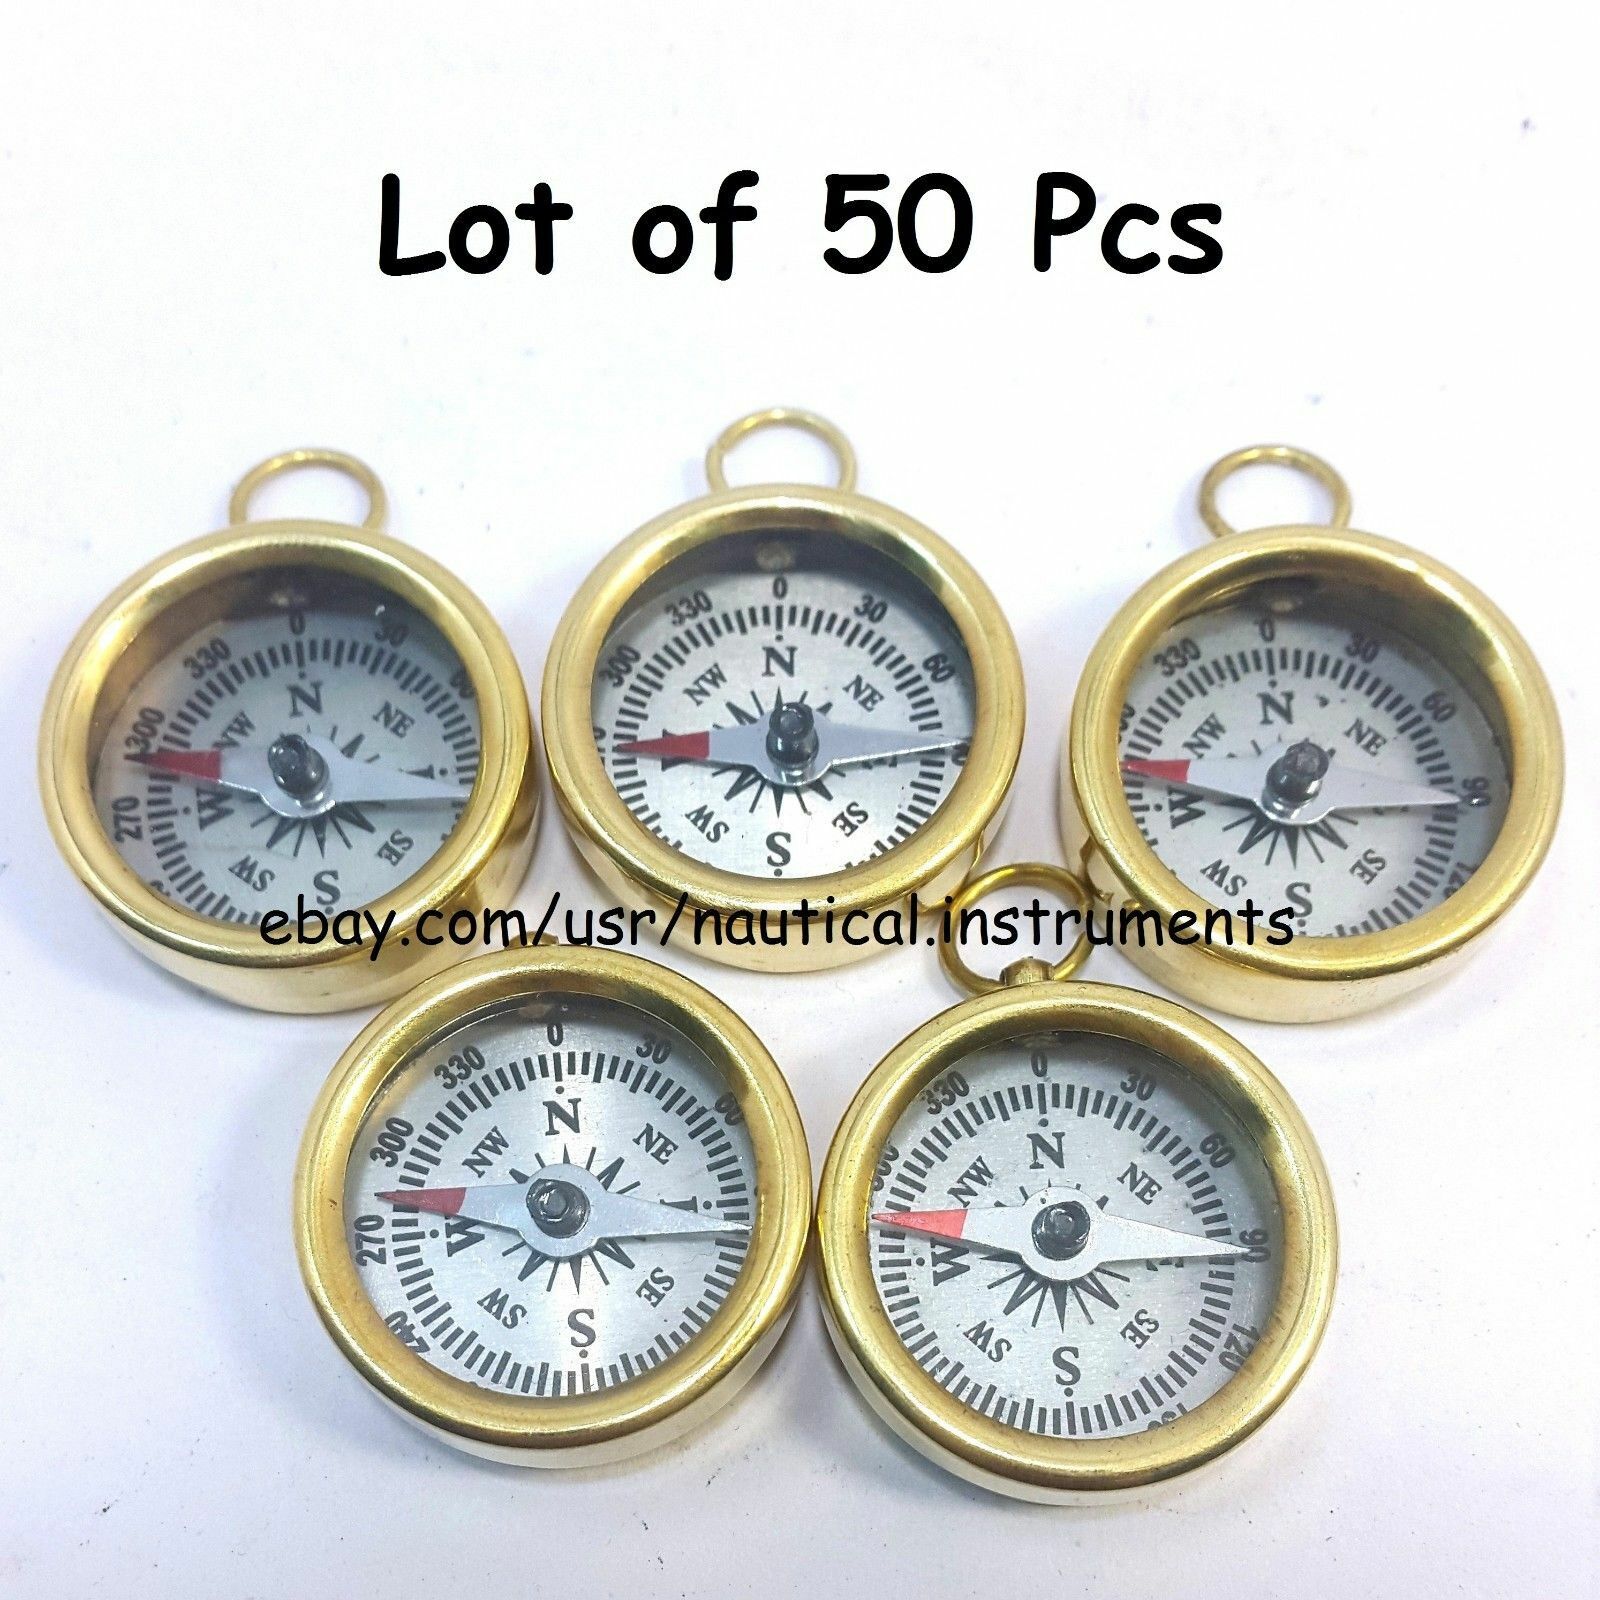 LOT  OF 50 PCS VINTAGE STYLE SOLID BRASS  WHITE DIAL POCKET COMPASS  Без бренда